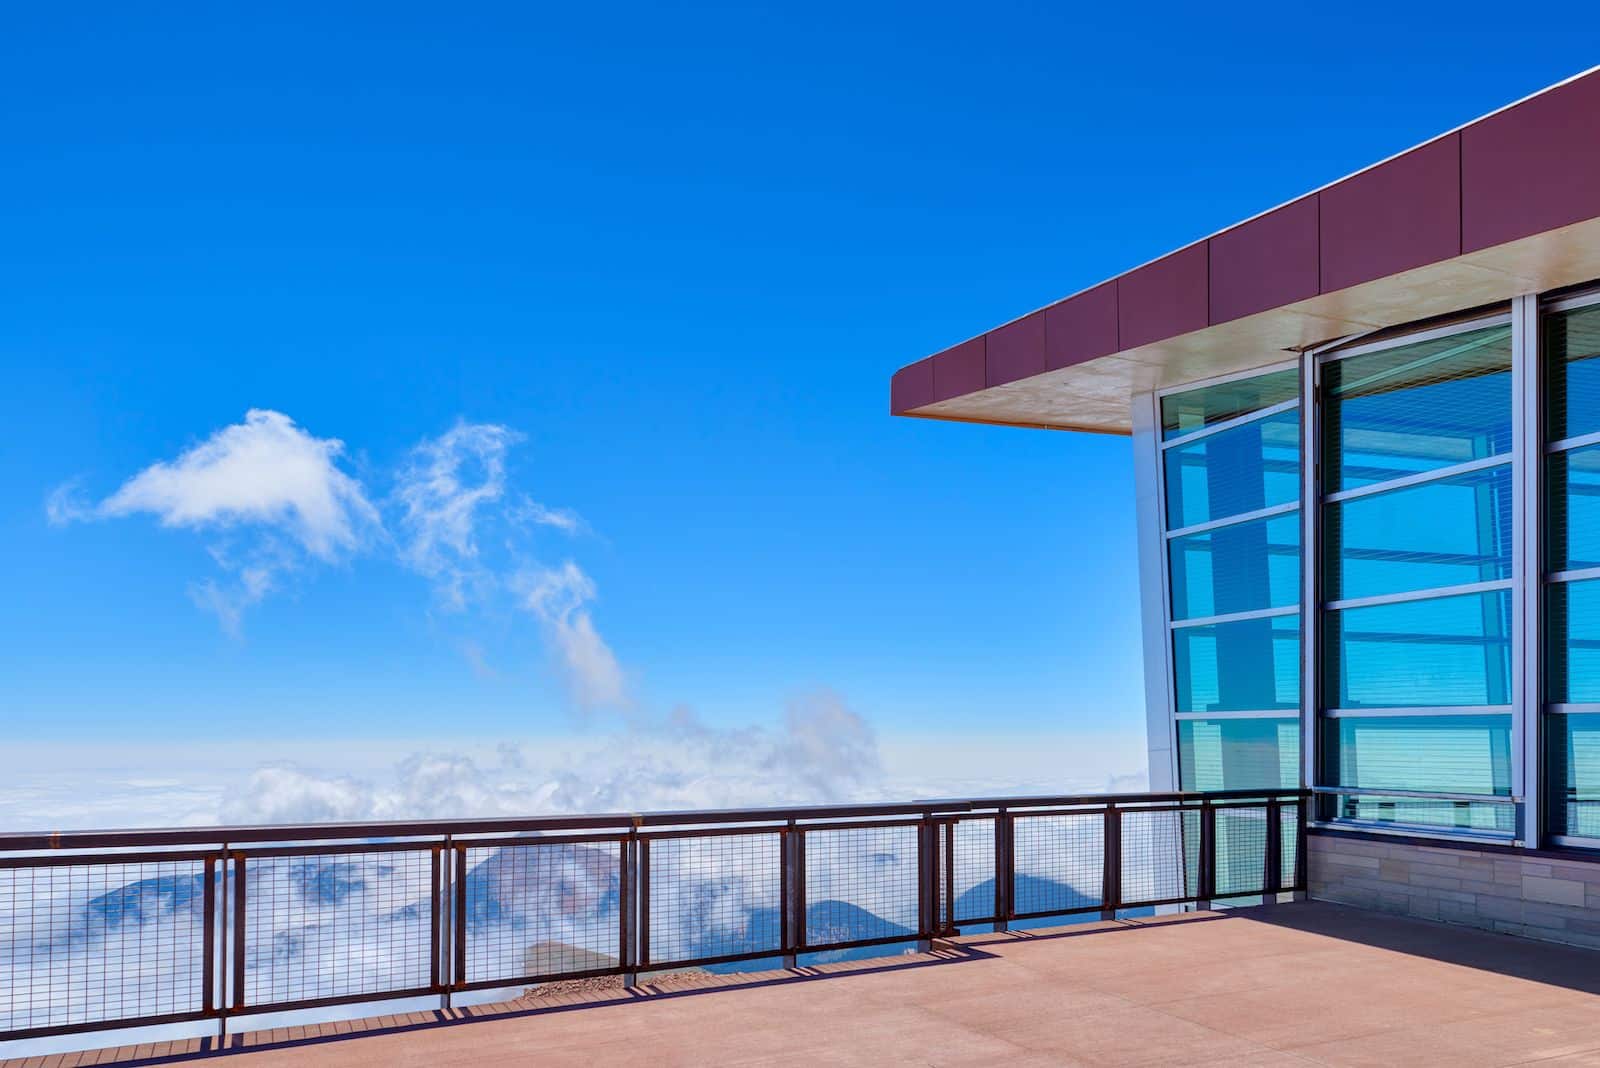 Pikes Peak Summit Complex Viewing Platform overlooking the clouds